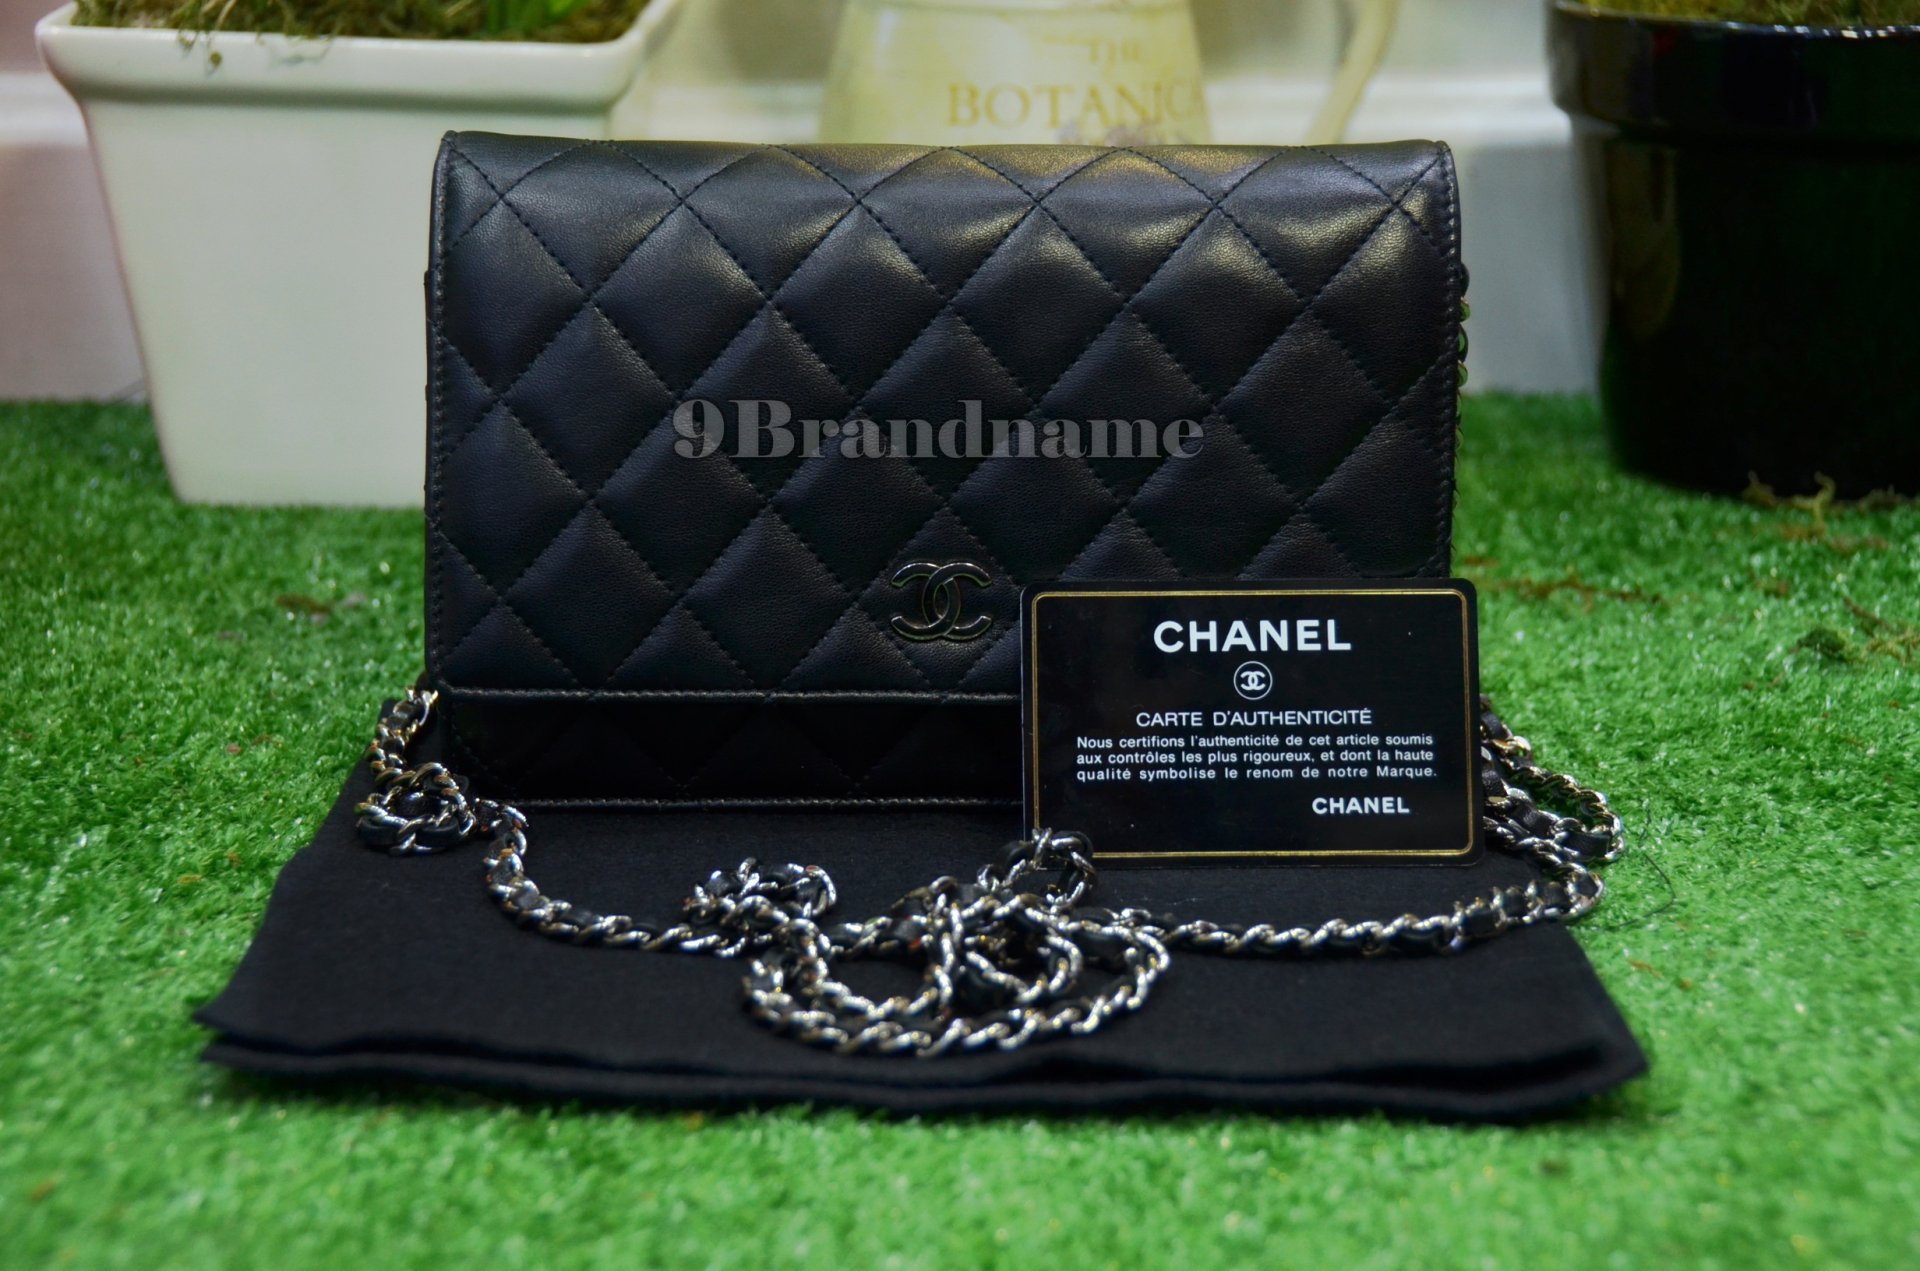 Chanel Wallet On Chain WOC Black Lamb SHW - Used Authentic Bag - 9brandname